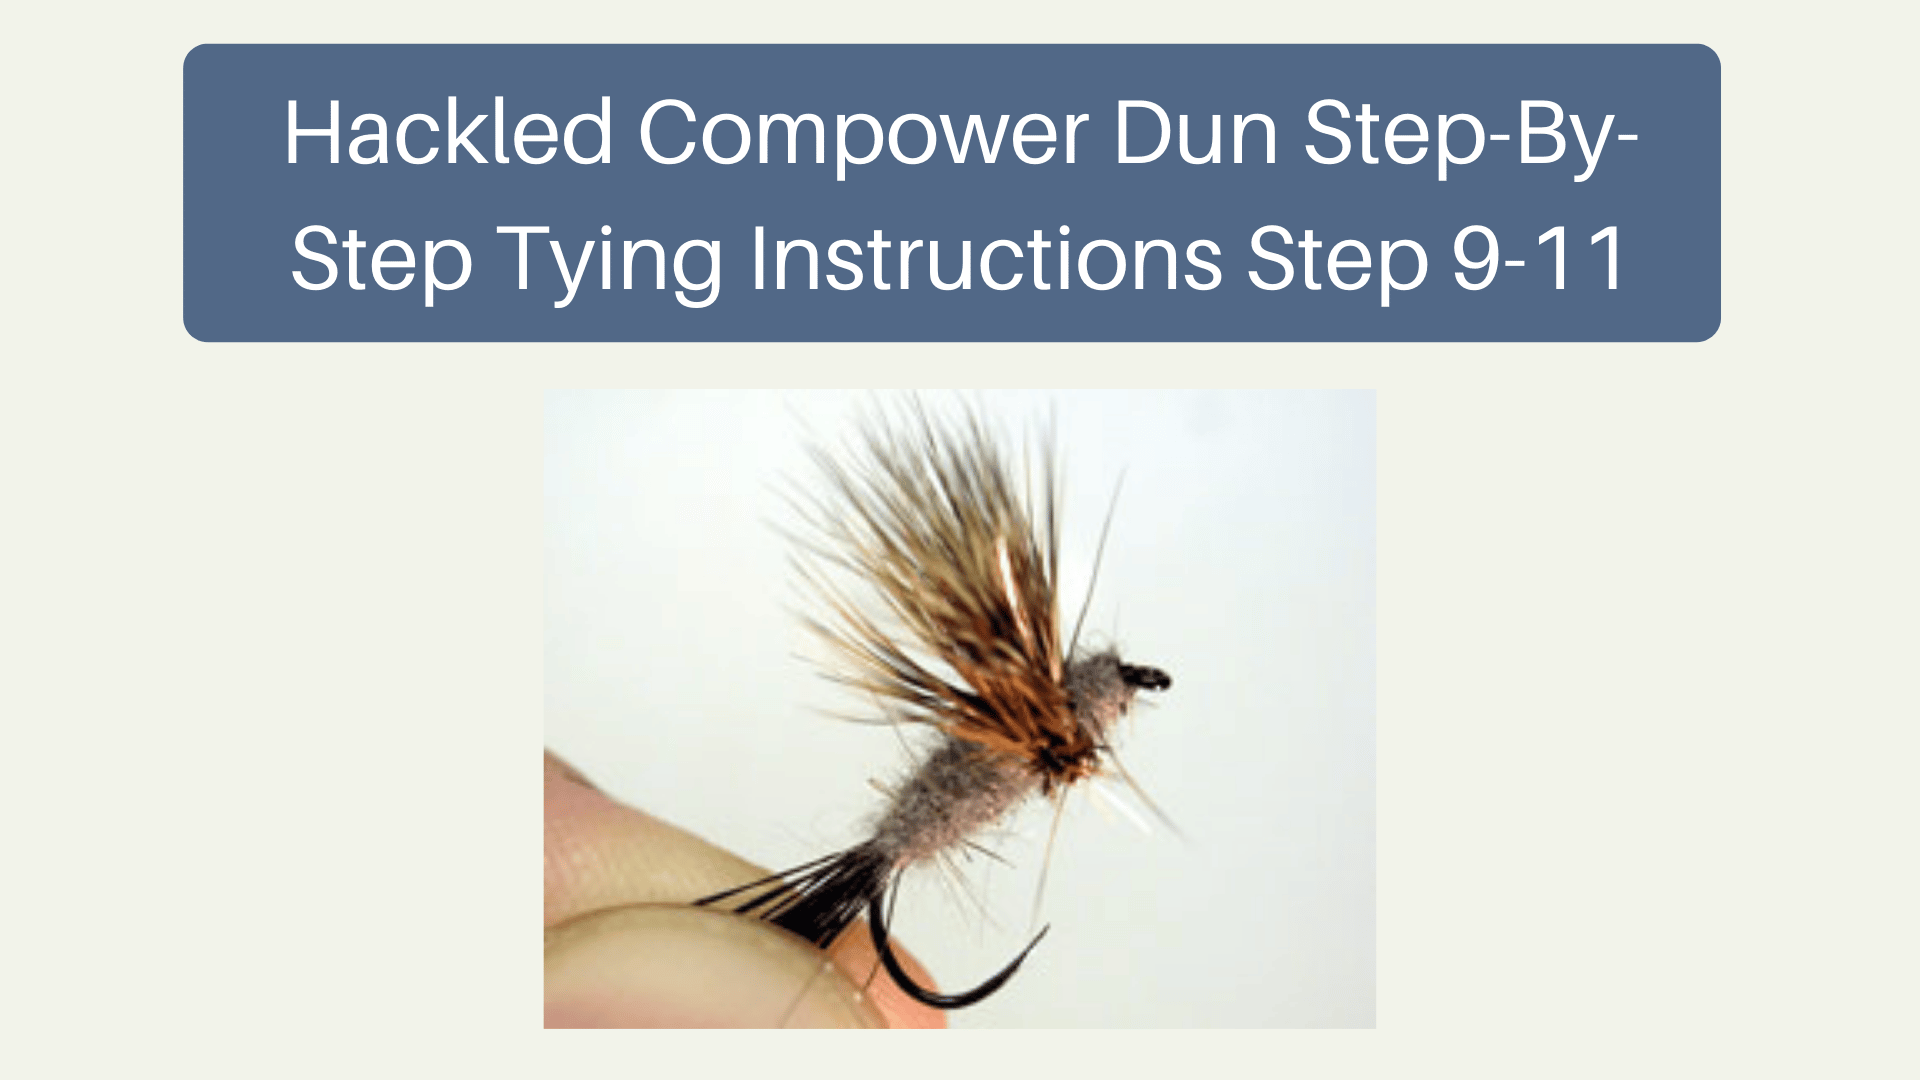 Hackled Compower Dun  Step-By-Step Tying Instructions Step 9-11